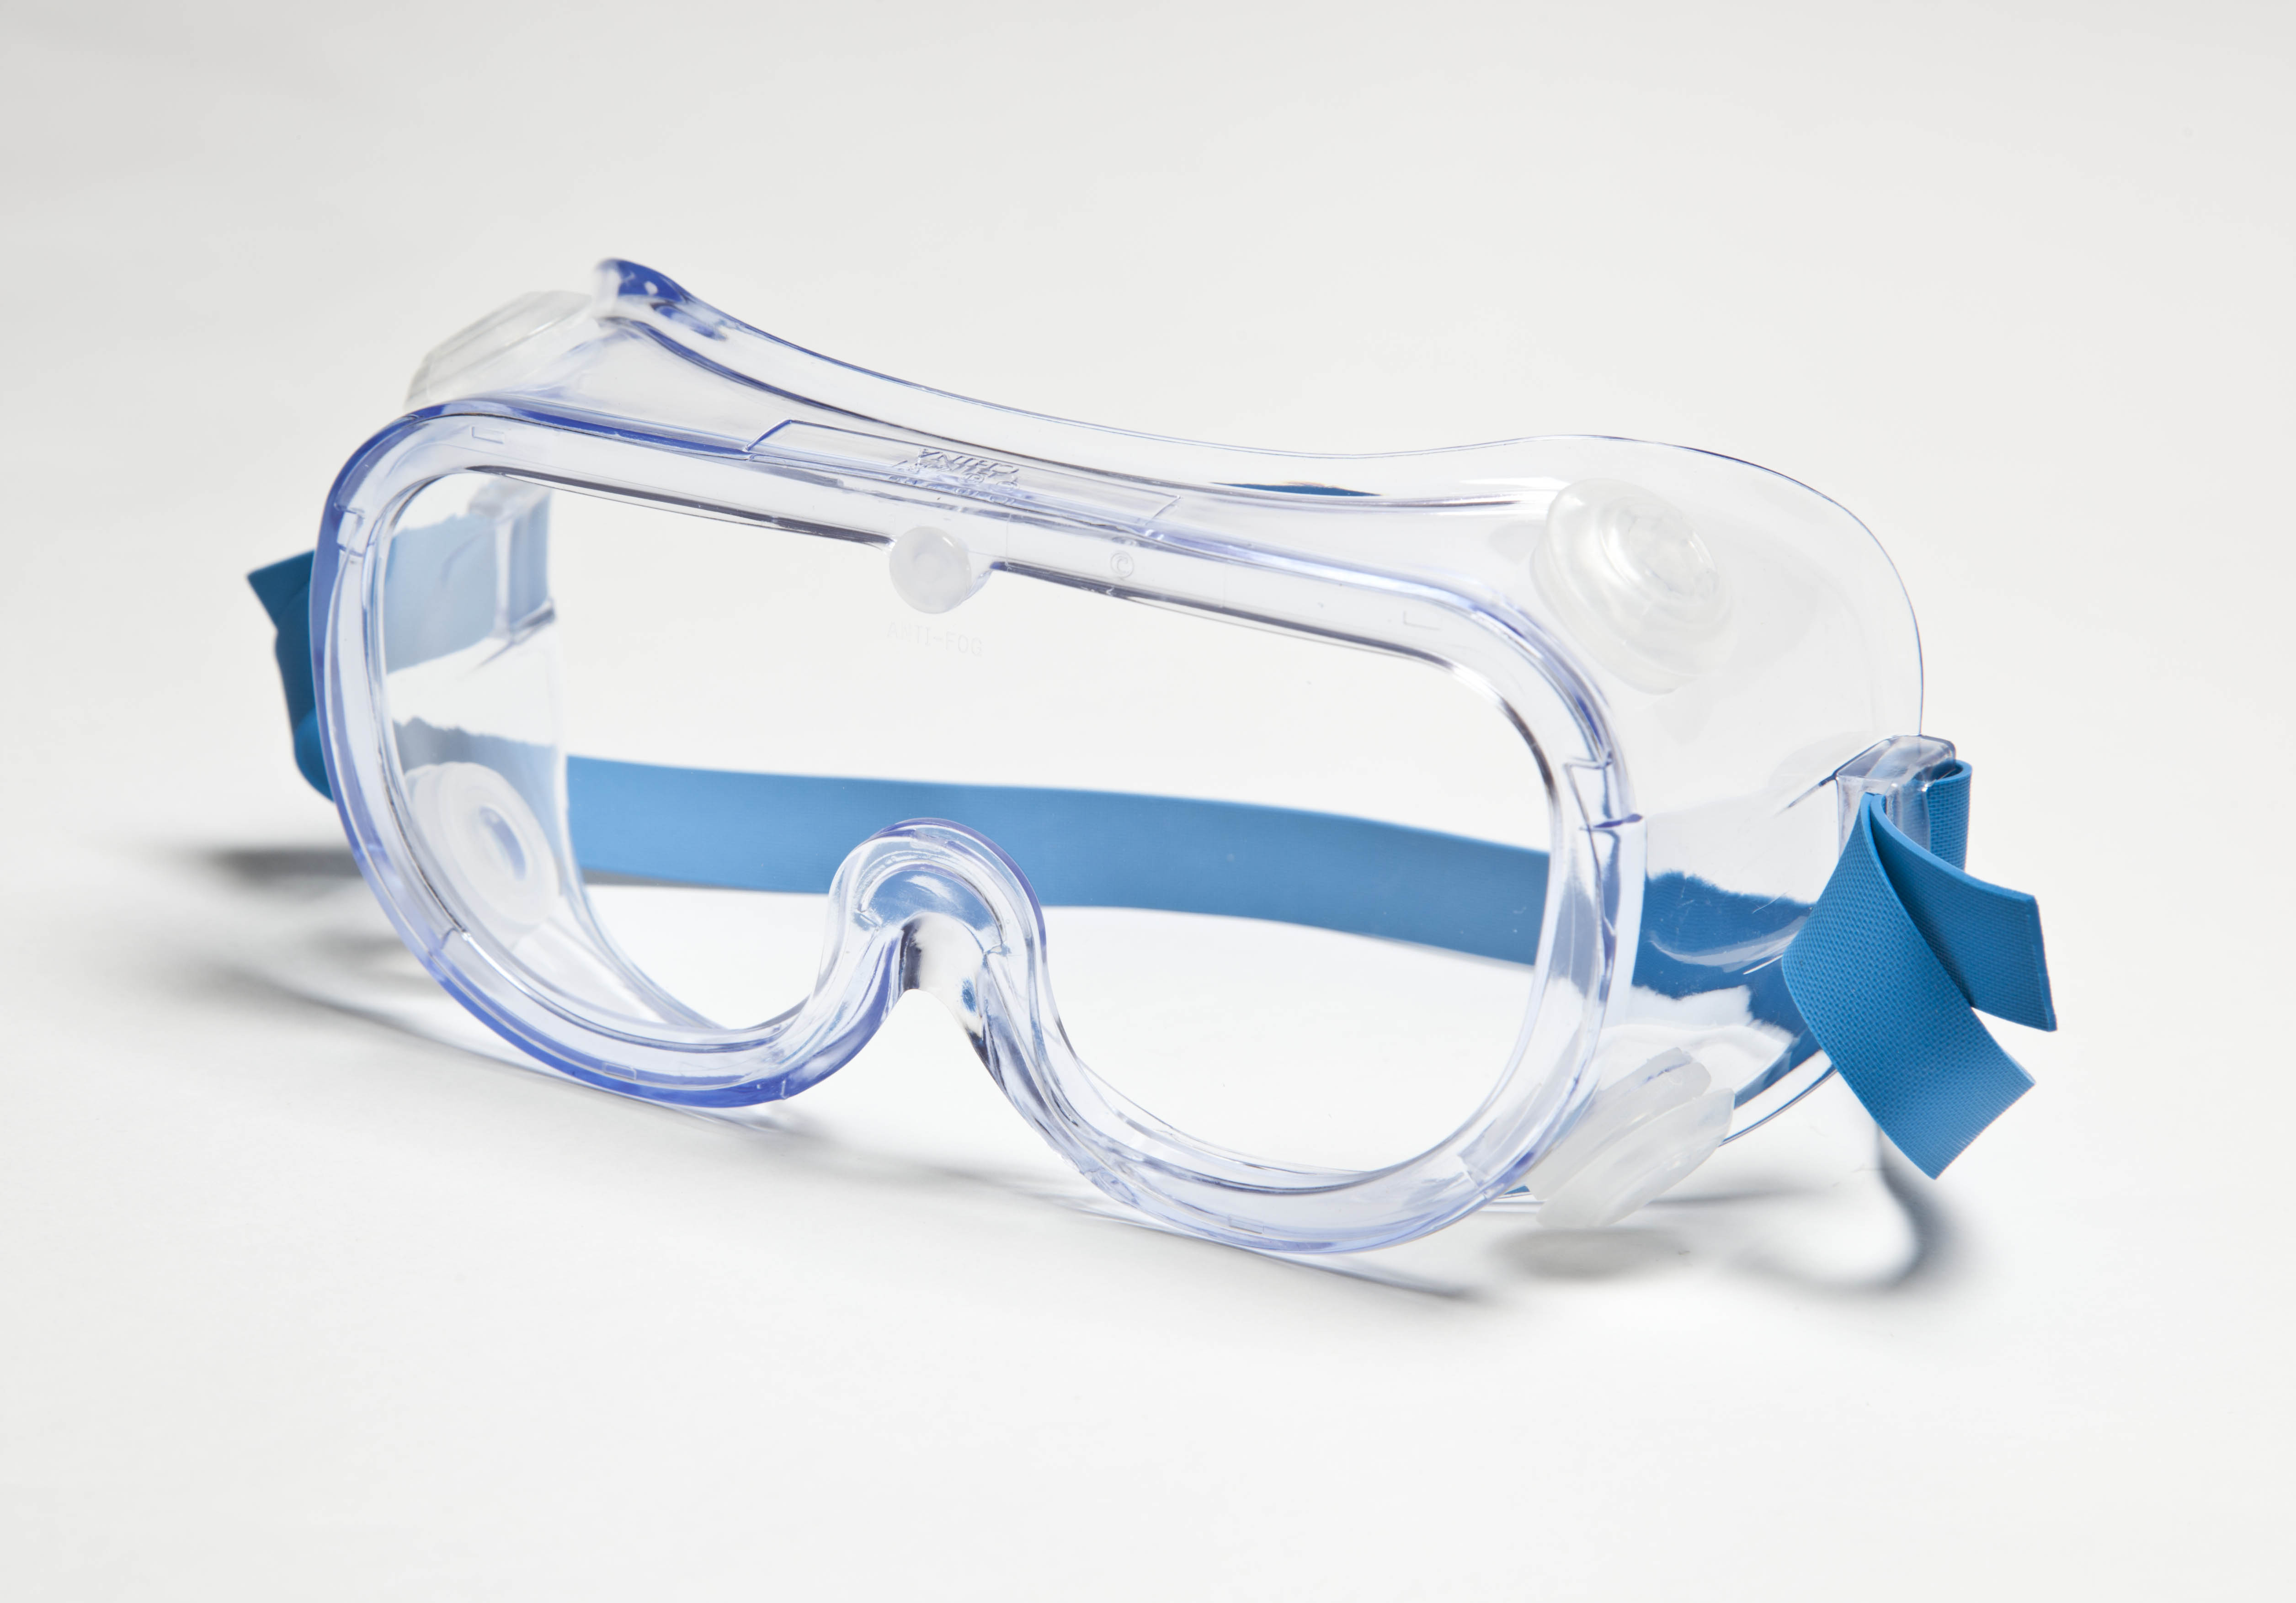 Safety Goggles Vented